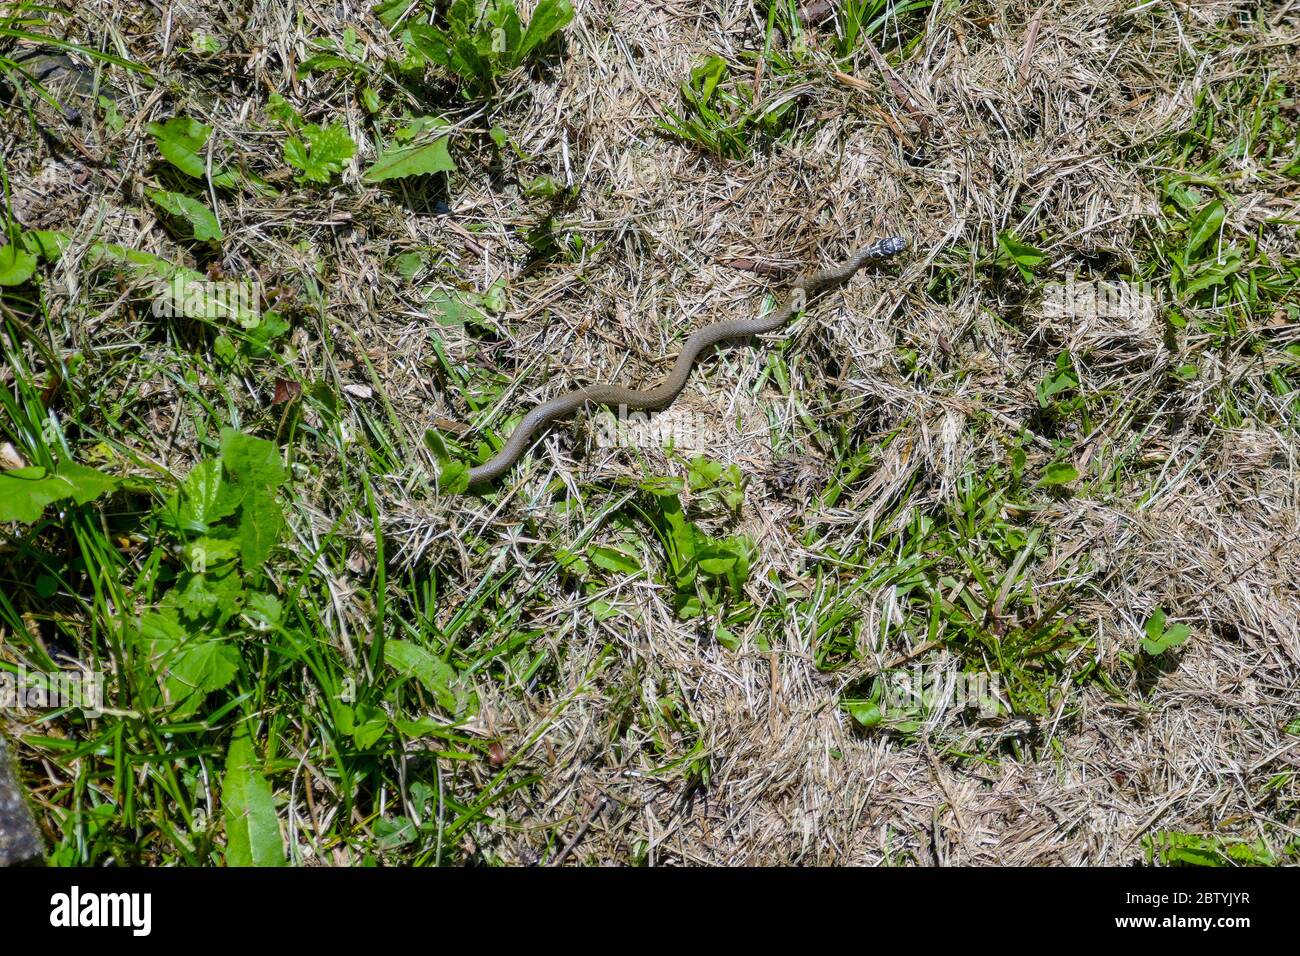 Juvenile western whip snake on the dry grassy ground, Ariege, French Pyrenees, Pyrenees, France Stock Photo